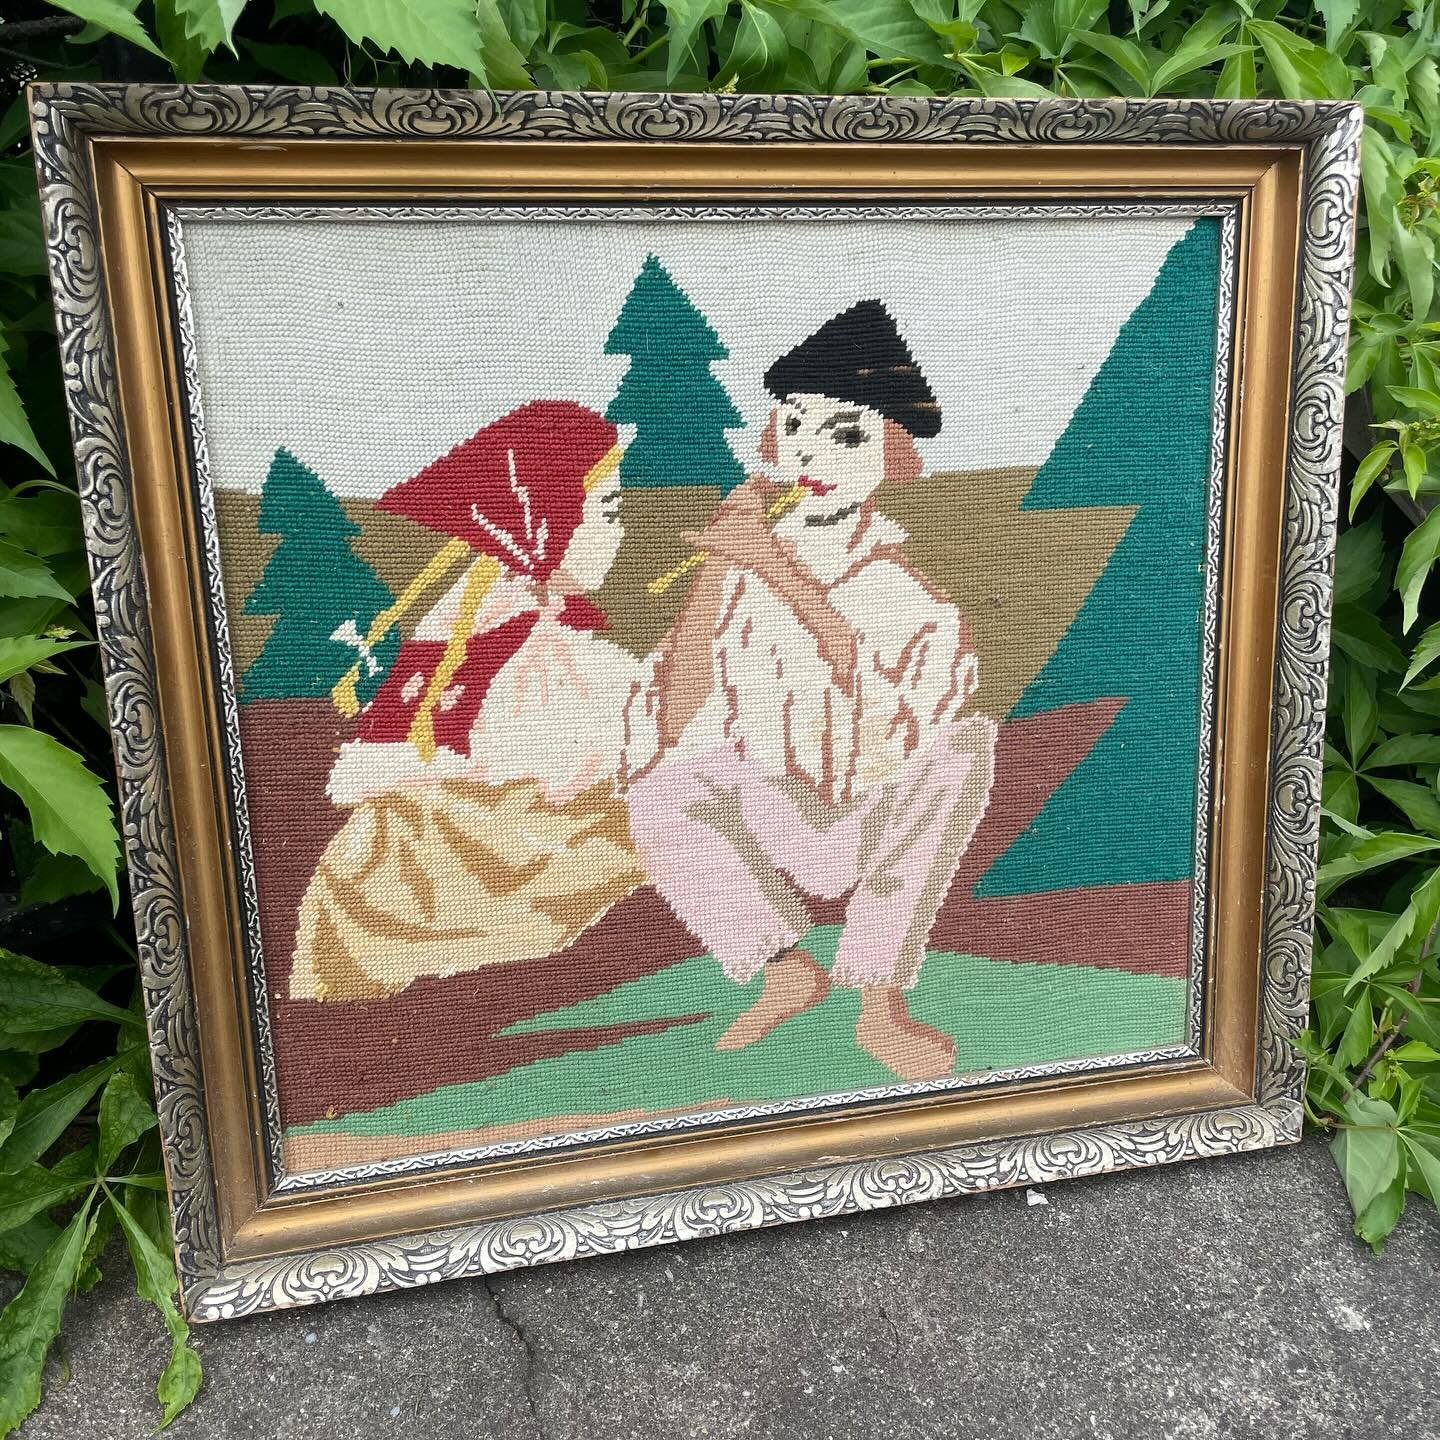 How cool is this vintage needlepoint in this real good frame?! 22x20&rdquo; $46.